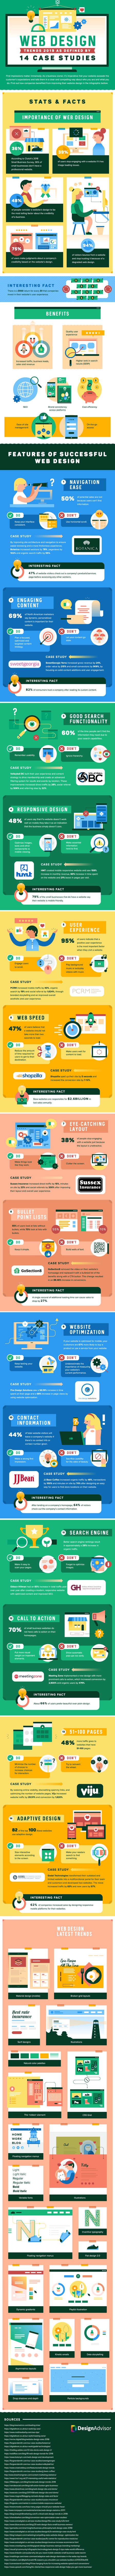 , Web Design Trends of 2019 [Infographic], TornCRM